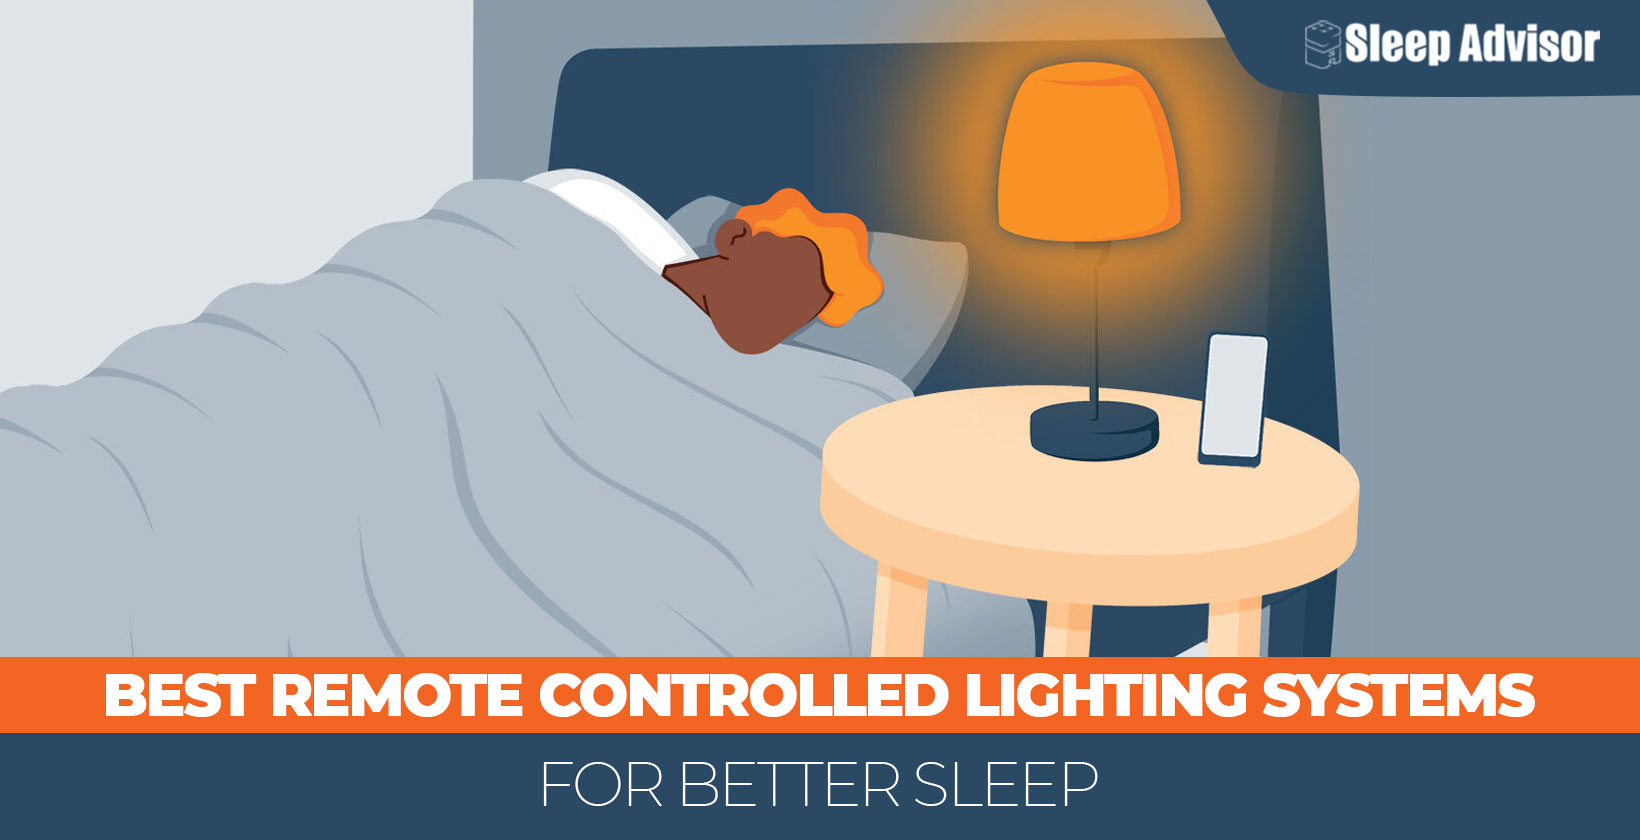 Best Remote Controlled Lighting Systems for Better Sleep